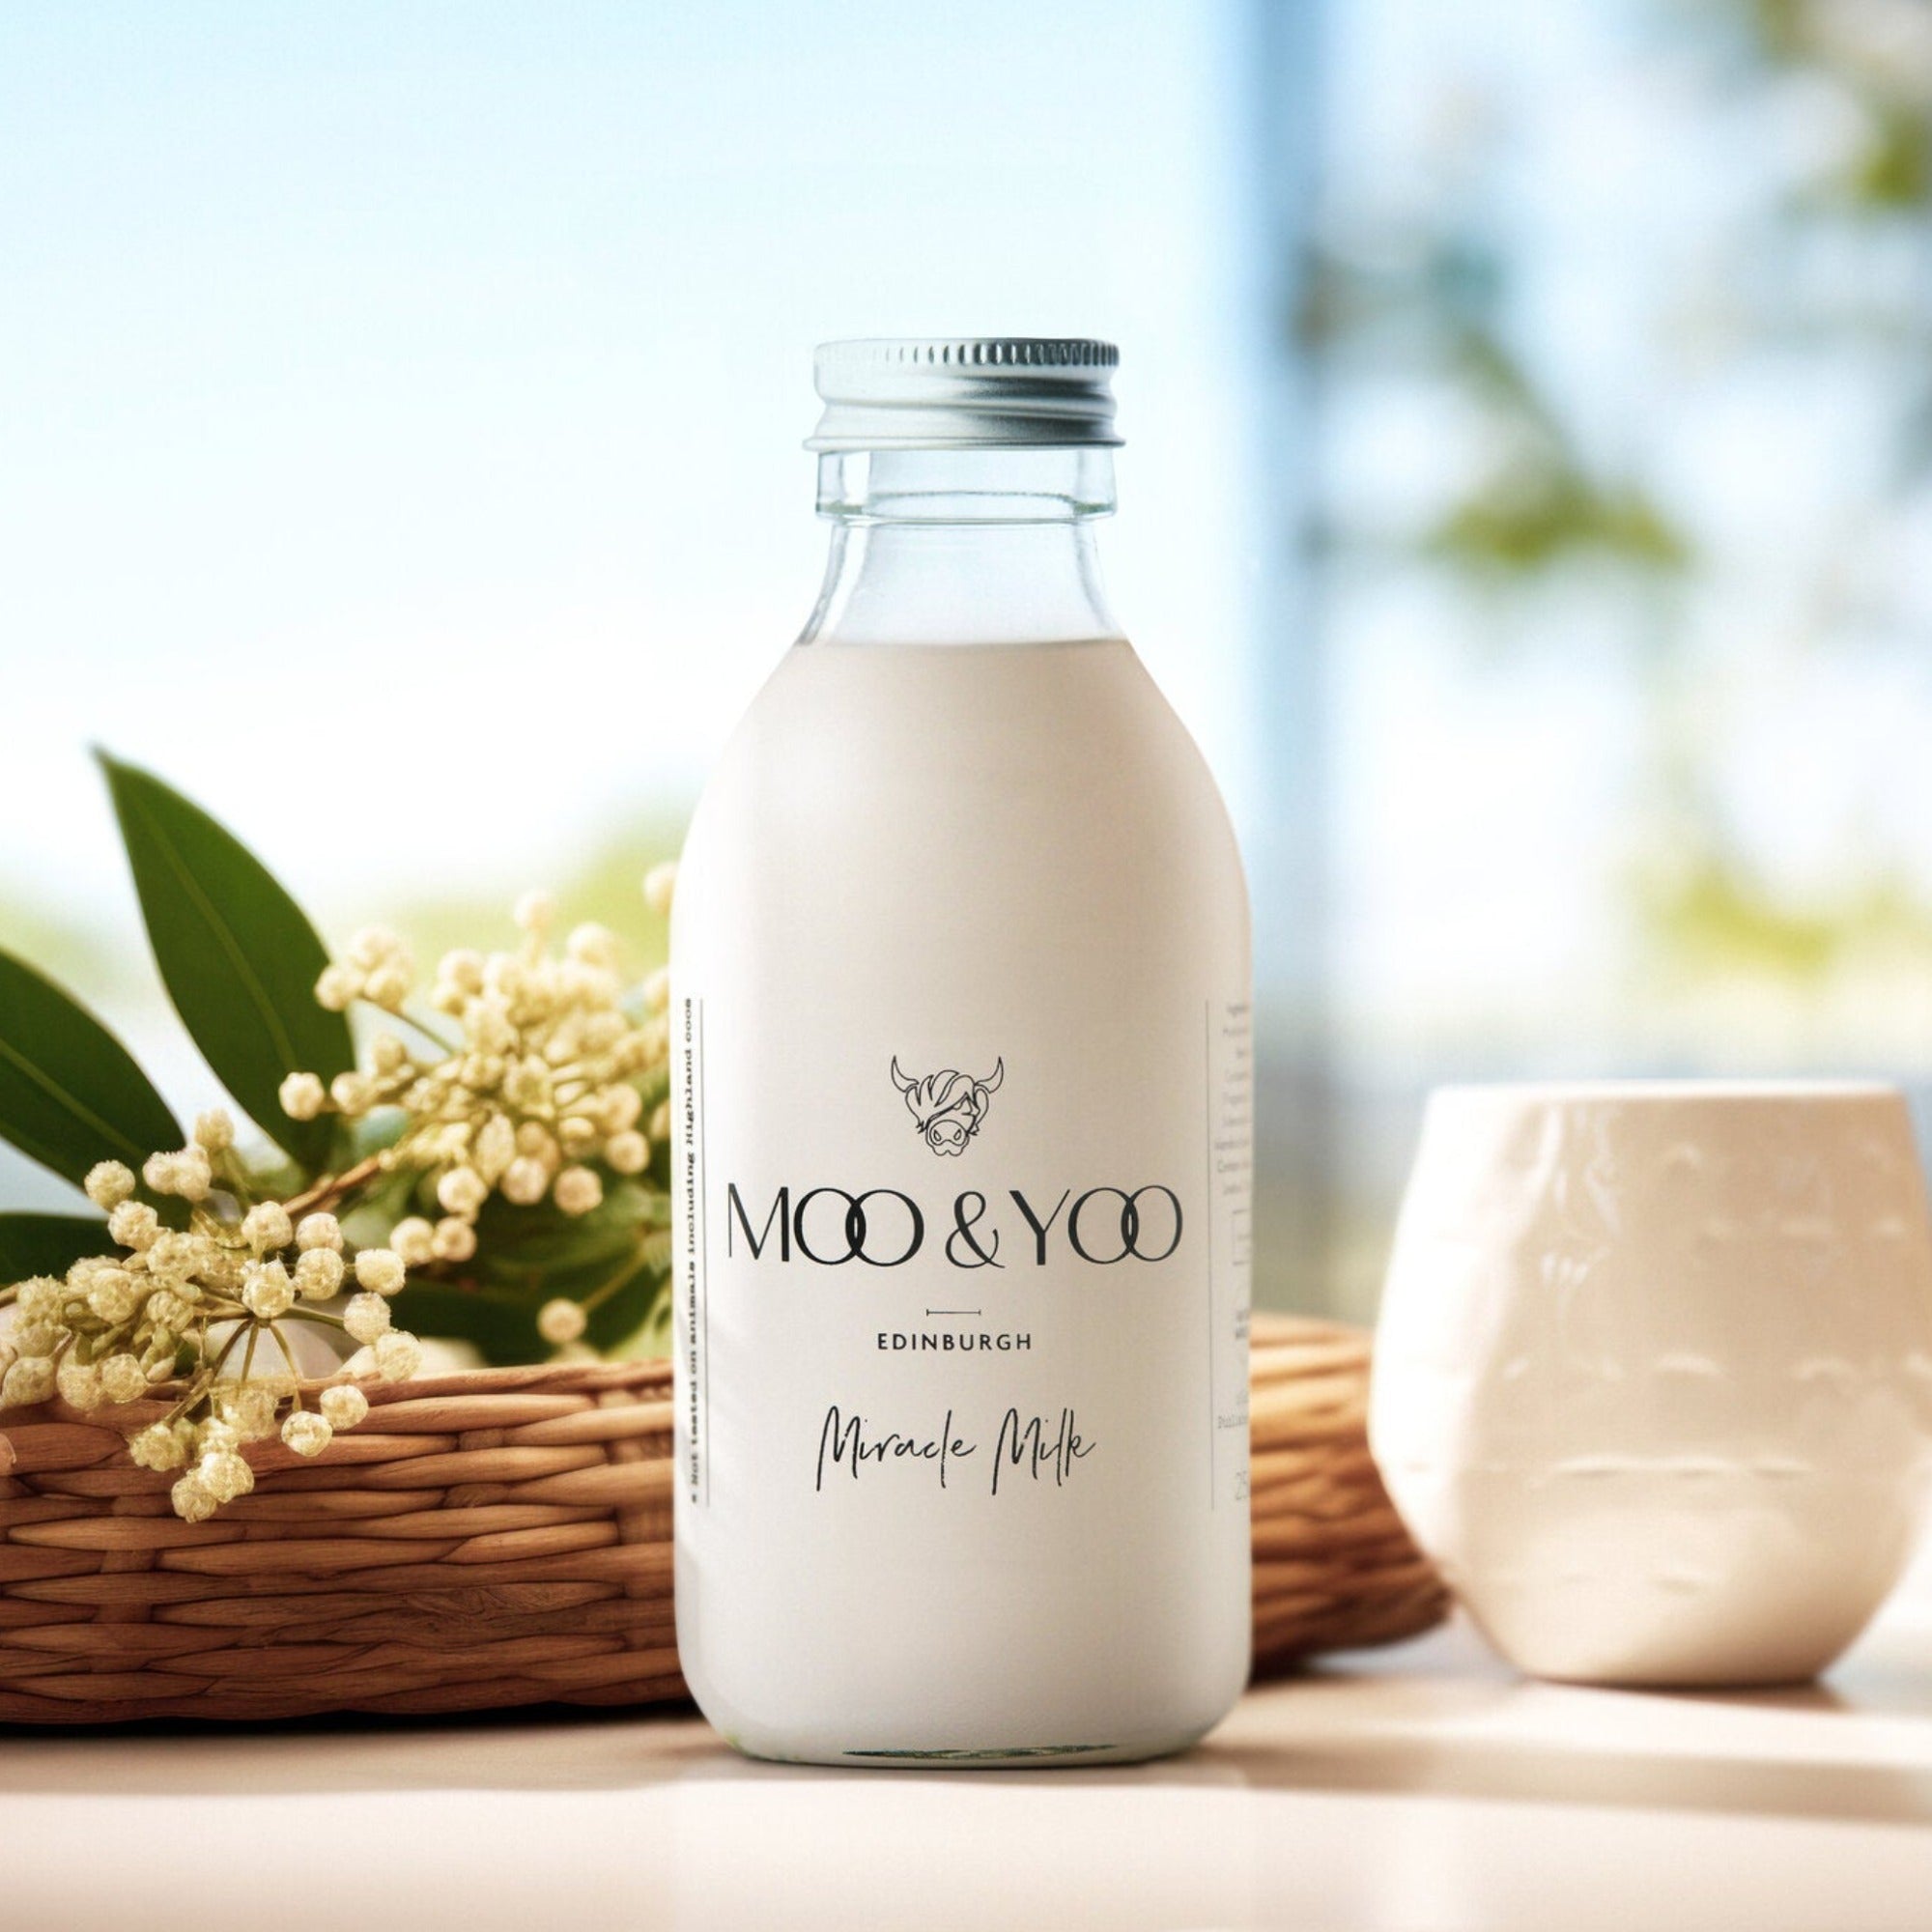 A glass bottle of Moo and Yoo Miracle Milk with an aluminium lid. It is placed on a white table with a basket with some small white flowers to one side and a small white plant pot to the other side.